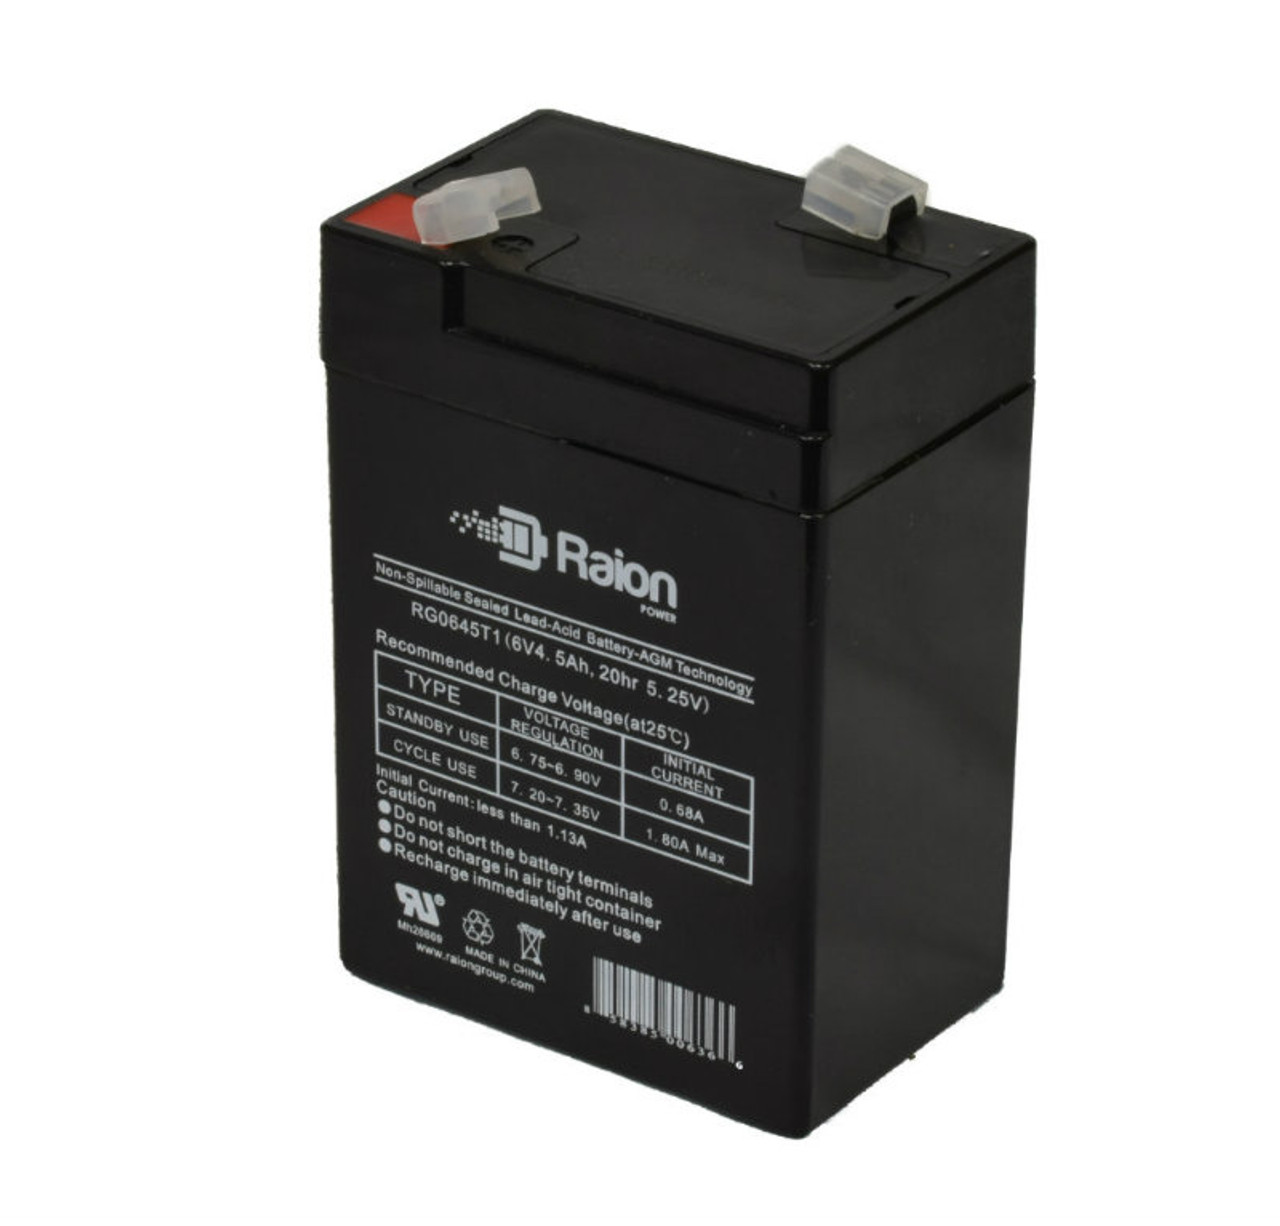 Raion Power RG0645T1 6V 4.5Ah Replacement Battery Cartridge for Japan PE4-6R